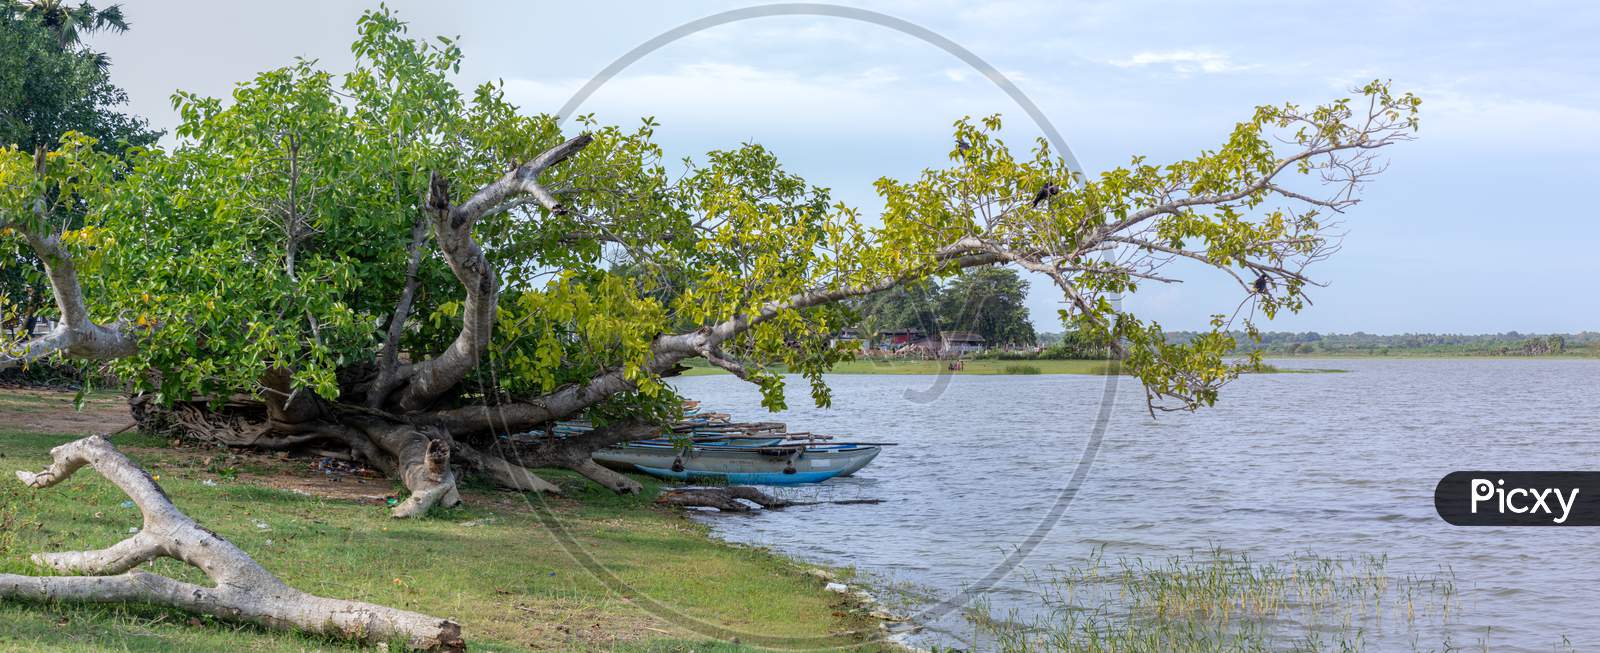 Panoramic View Of Beautiful Lake Shore And Tree In Hambantota, Sunny Summer Day Under The Clear Blue Skies Greenery Landscape.